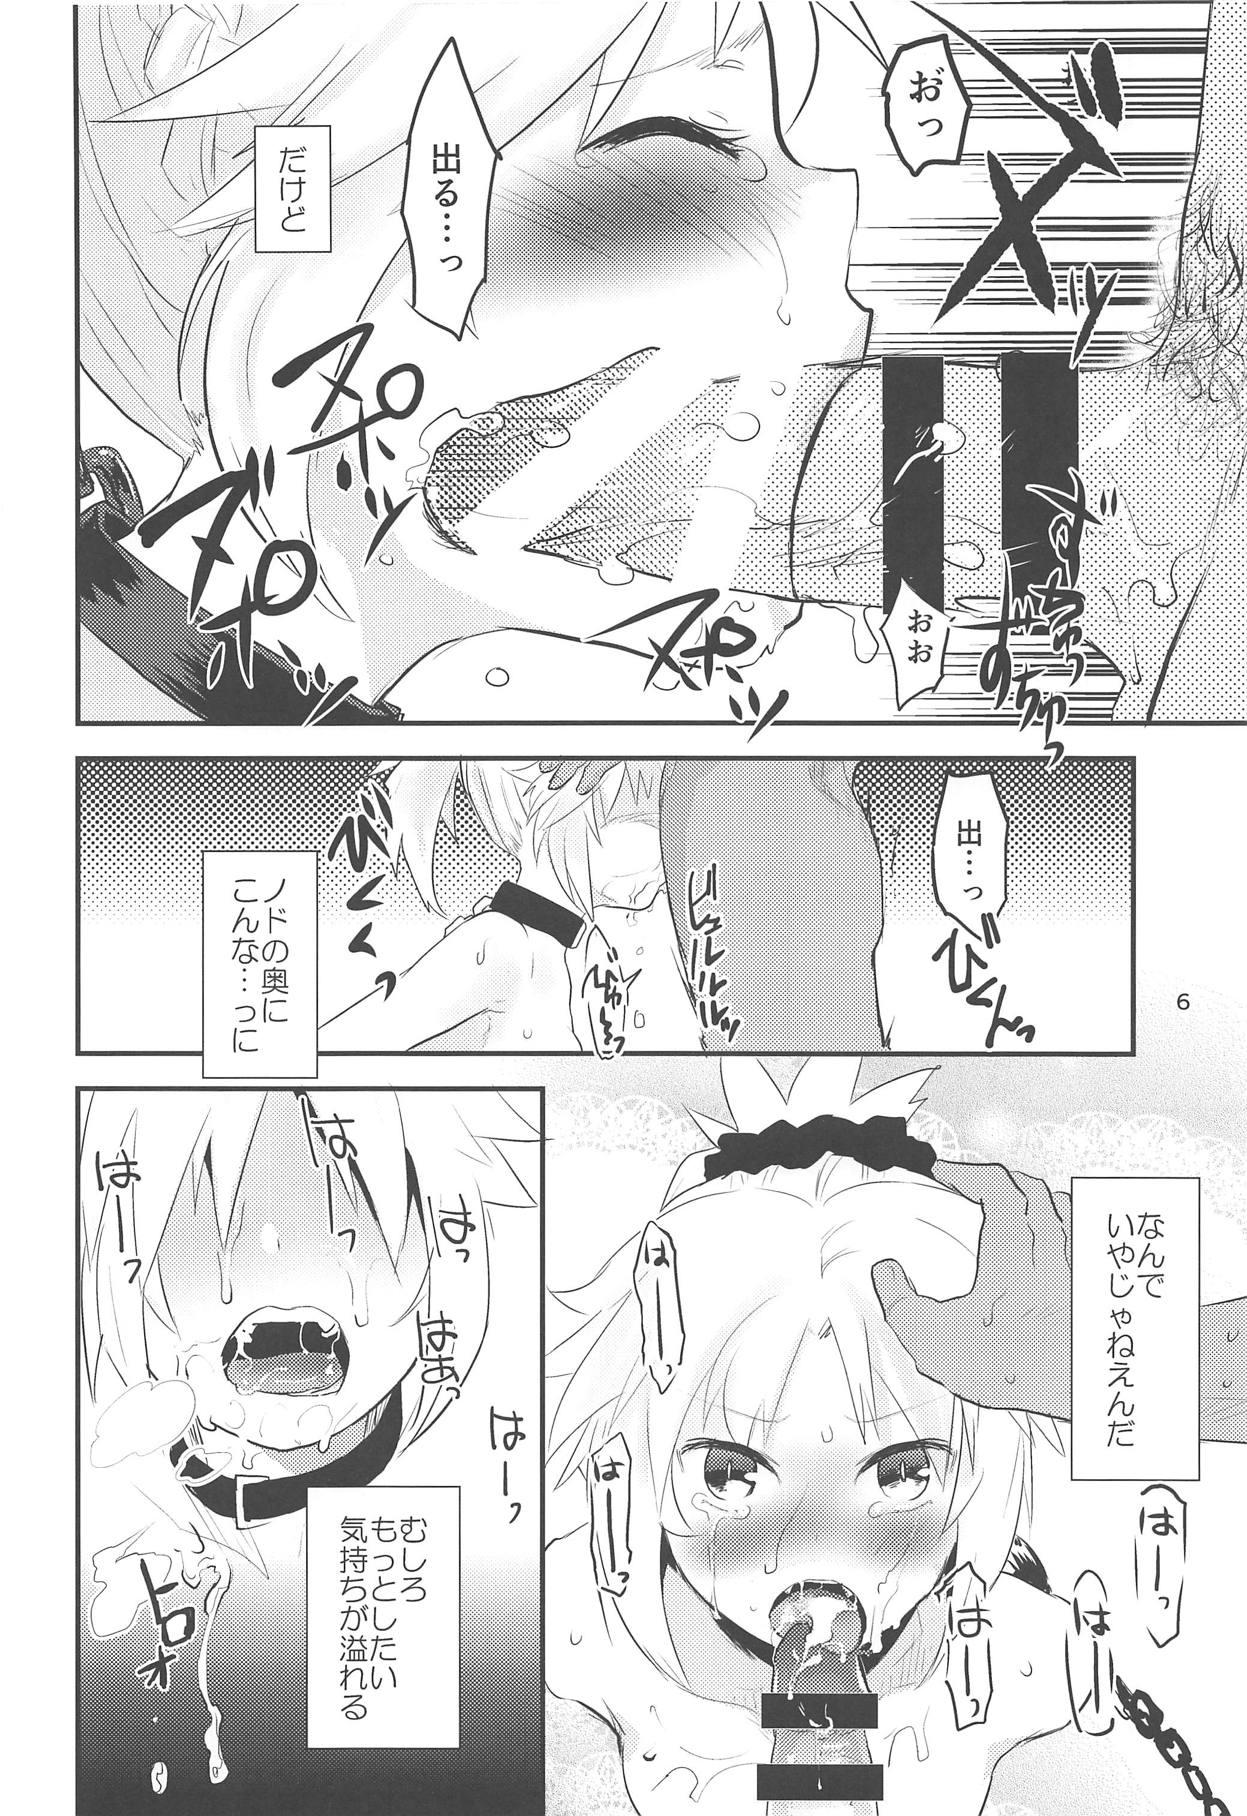 Boobs Erotic to Knight - Fate grand order Girl Gets Fucked - Page 5